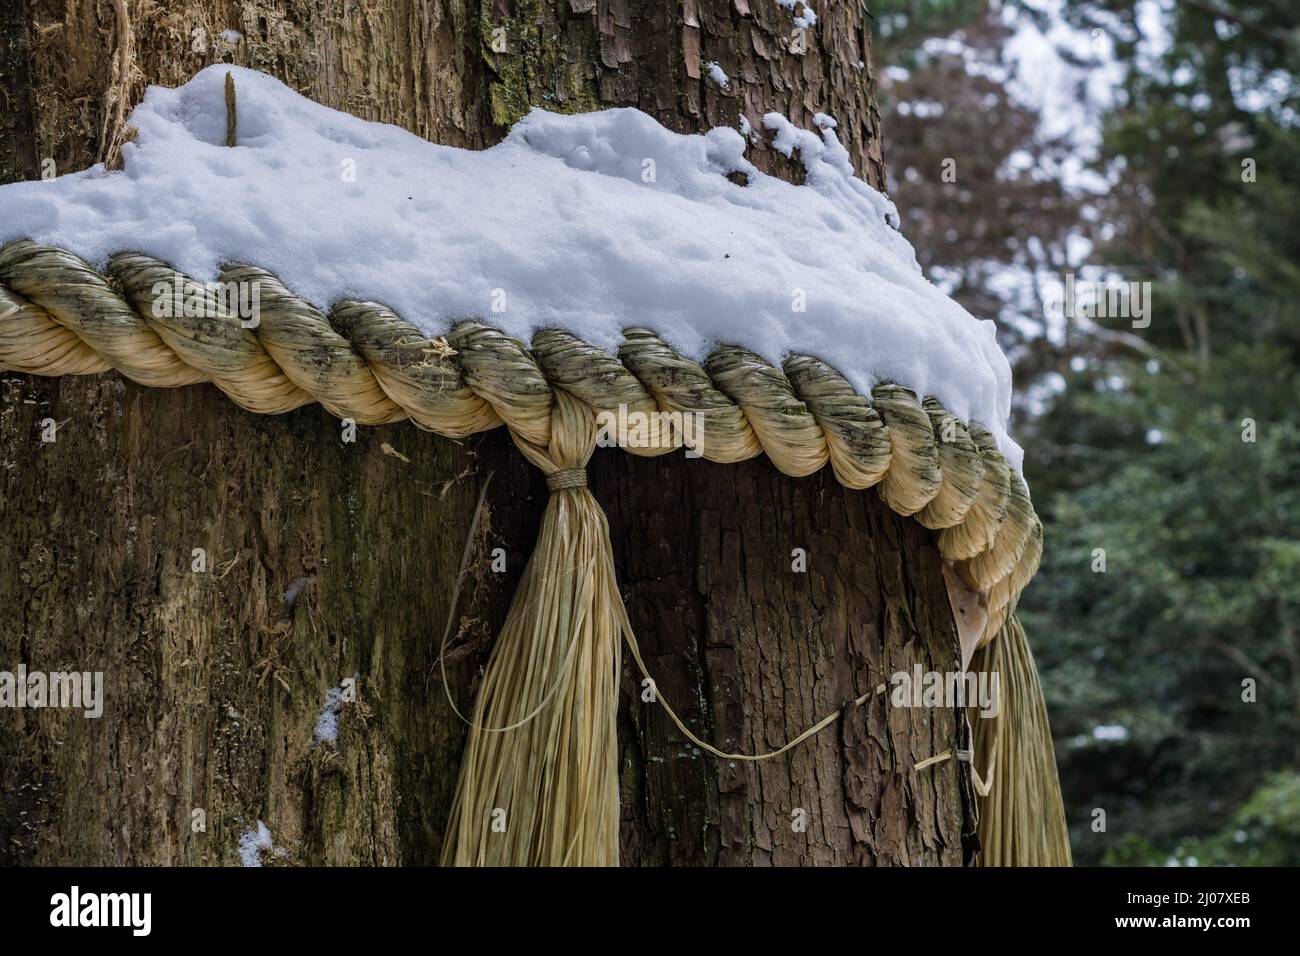 Traditional Japanese Shinto shimenawa sacred rope covered in snow, tied around a large tree in a forest in Kyoto Japan. Stock Photo